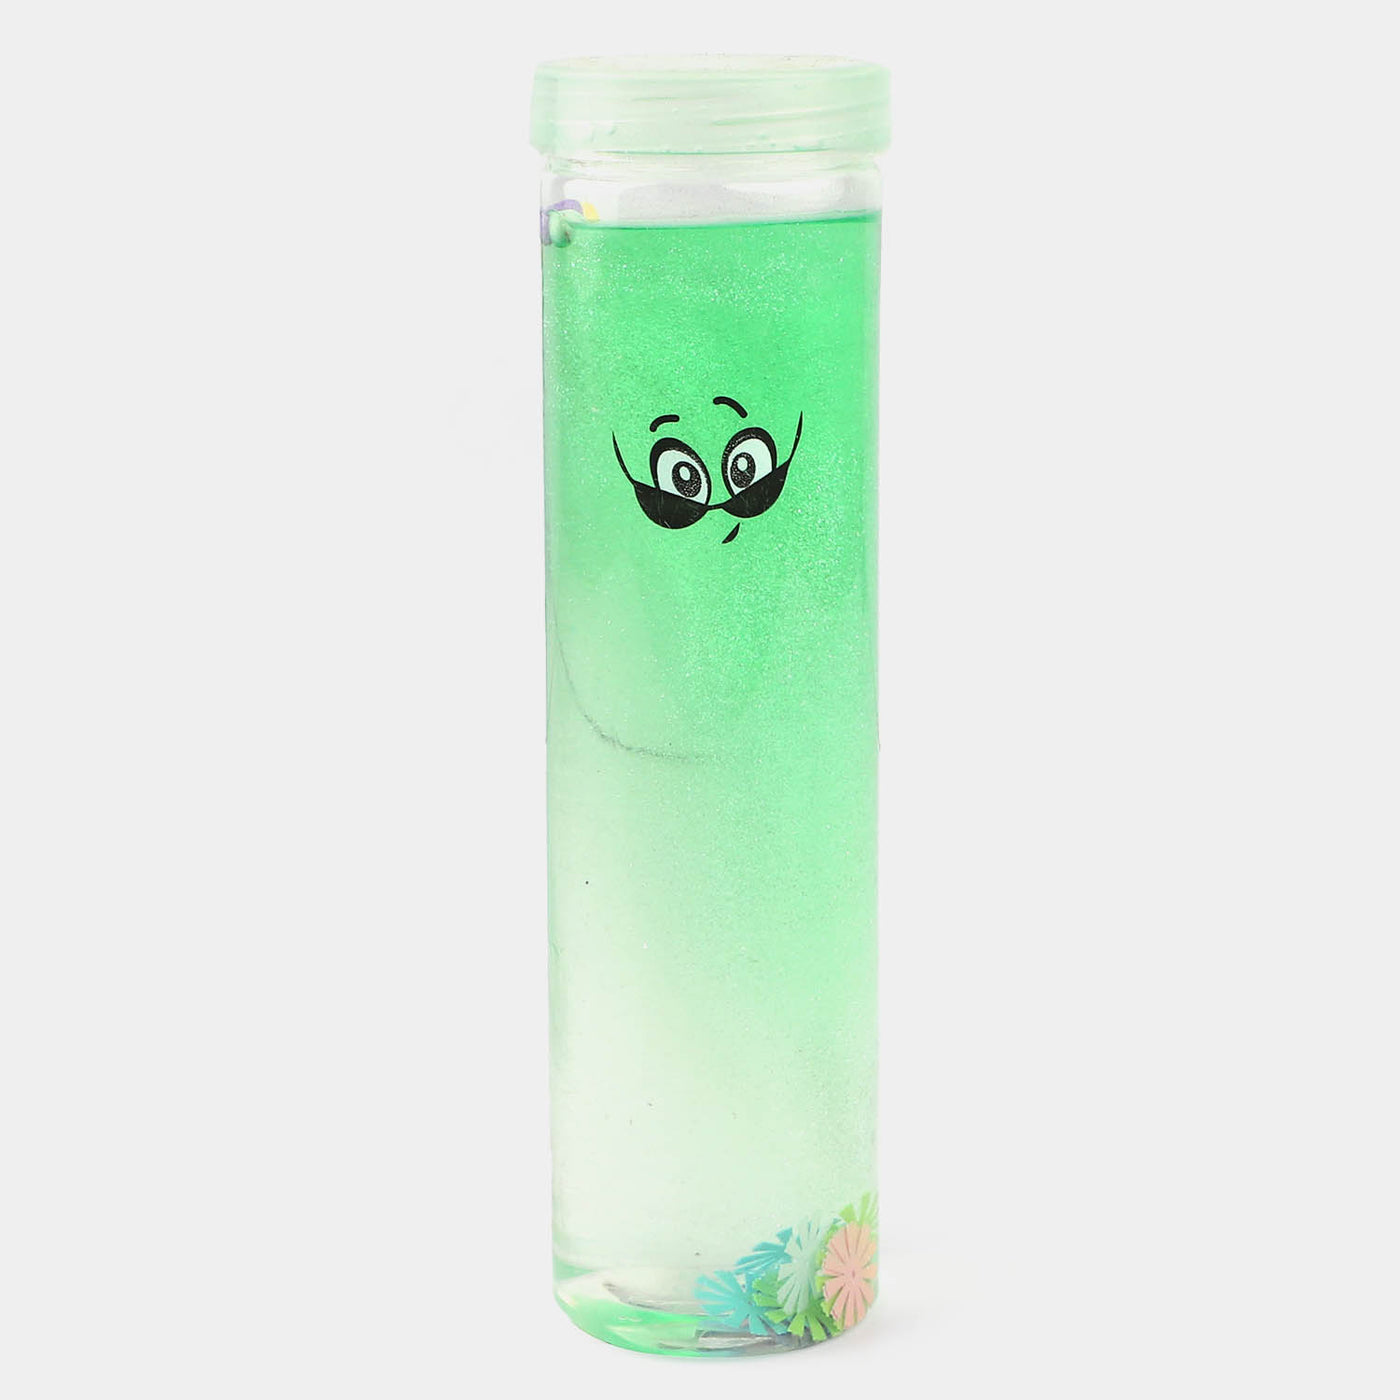 Slime Jelly For Kids